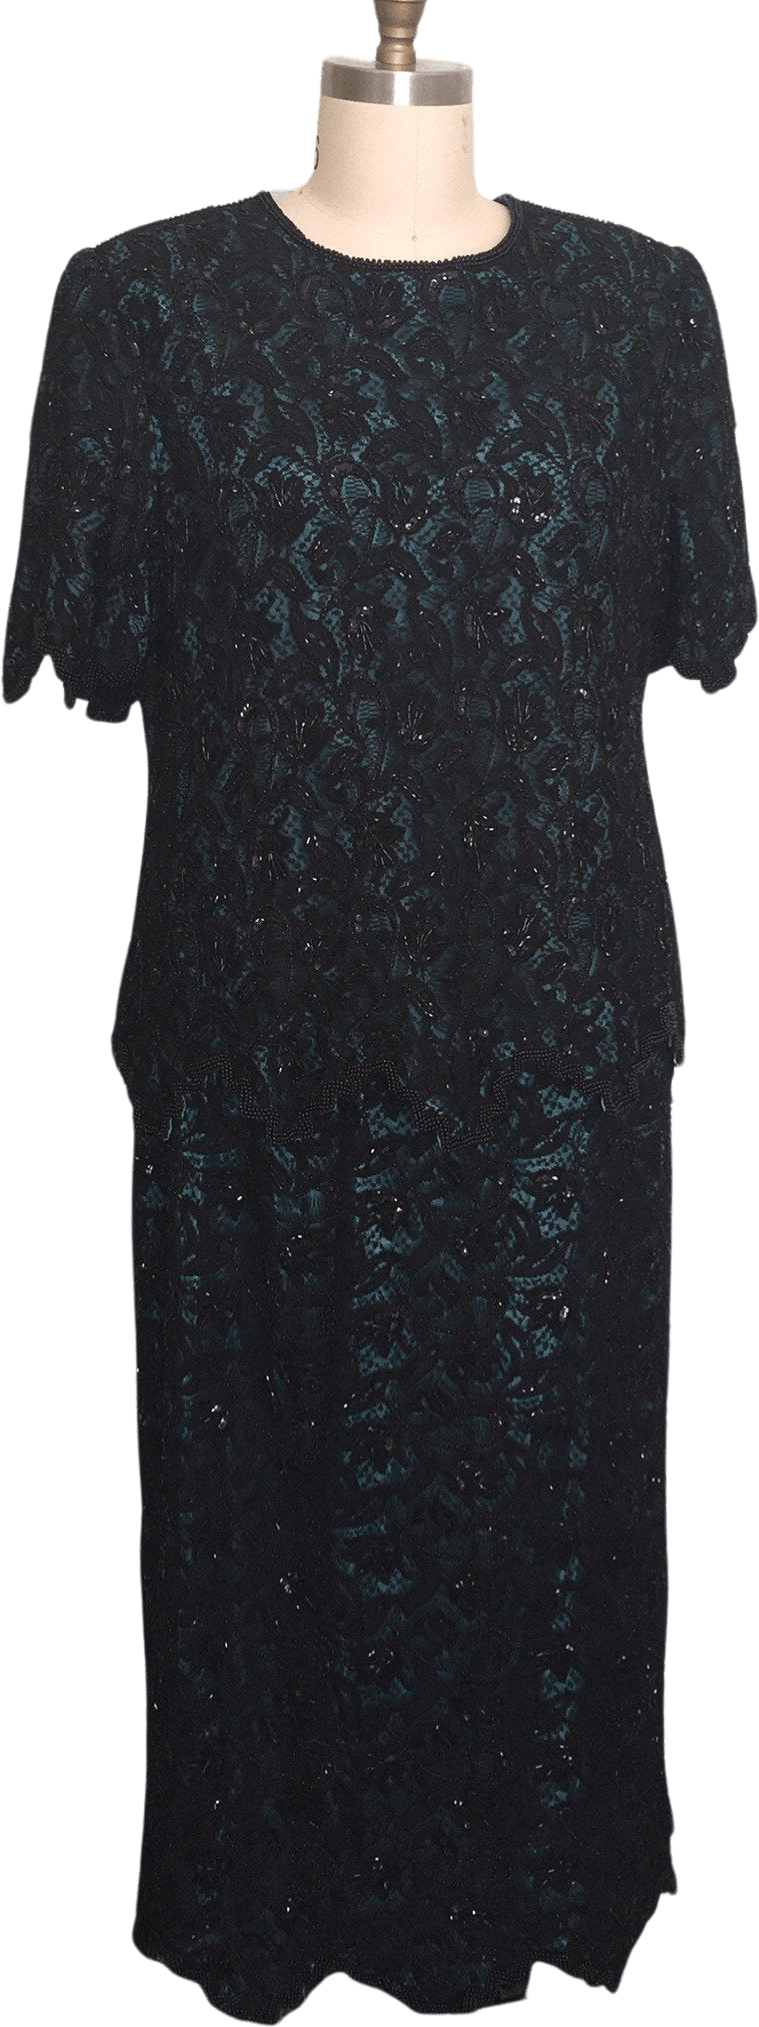 Vintage 80’s Black and Teal Beaded Lace Dress by Brilliante | Shop ...